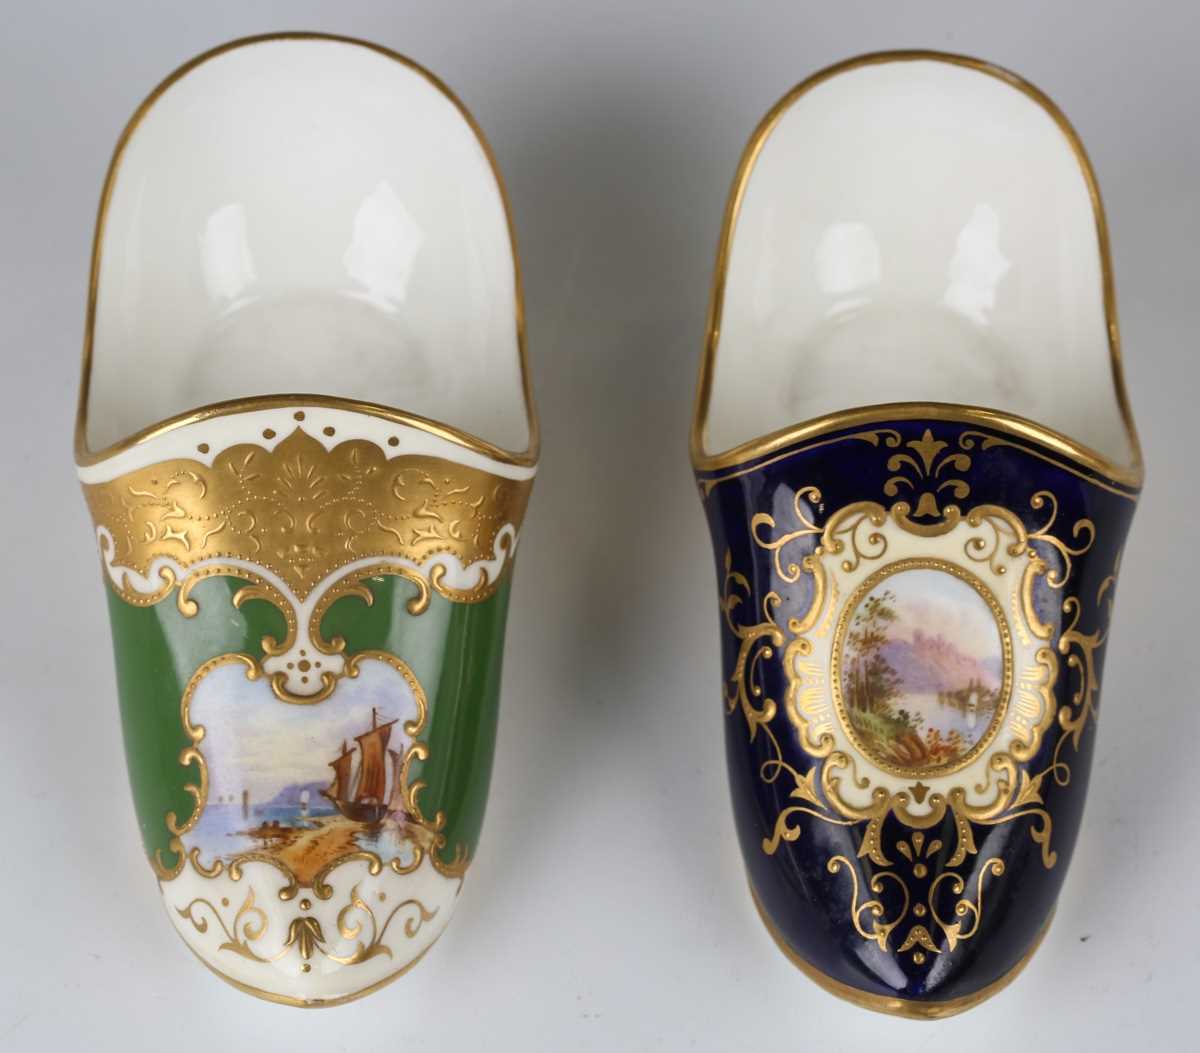 Two Coalport porcelain models of slippers or shoes, early 20th century, the first painted with a - Image 3 of 10